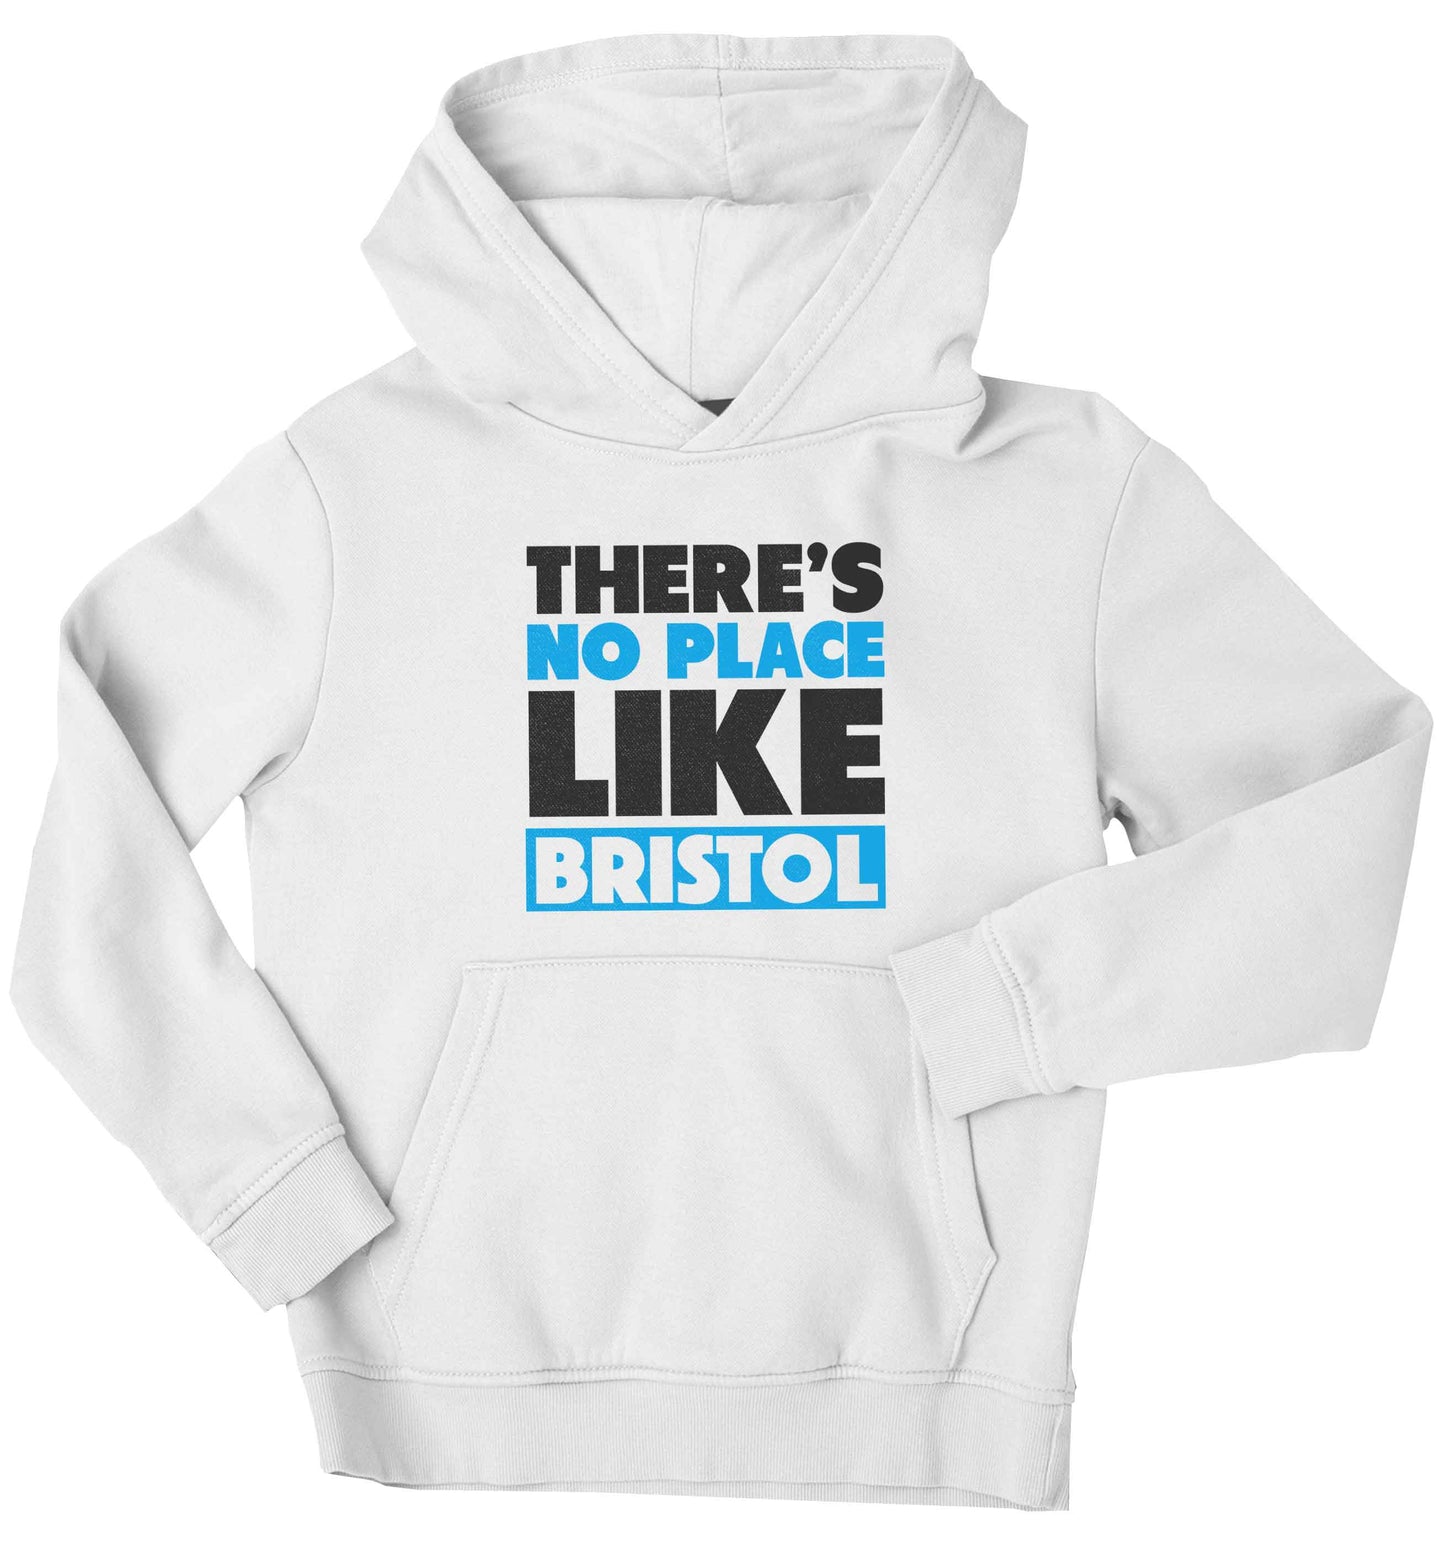 There's no place like Bristol children's white hoodie 12-13 Years